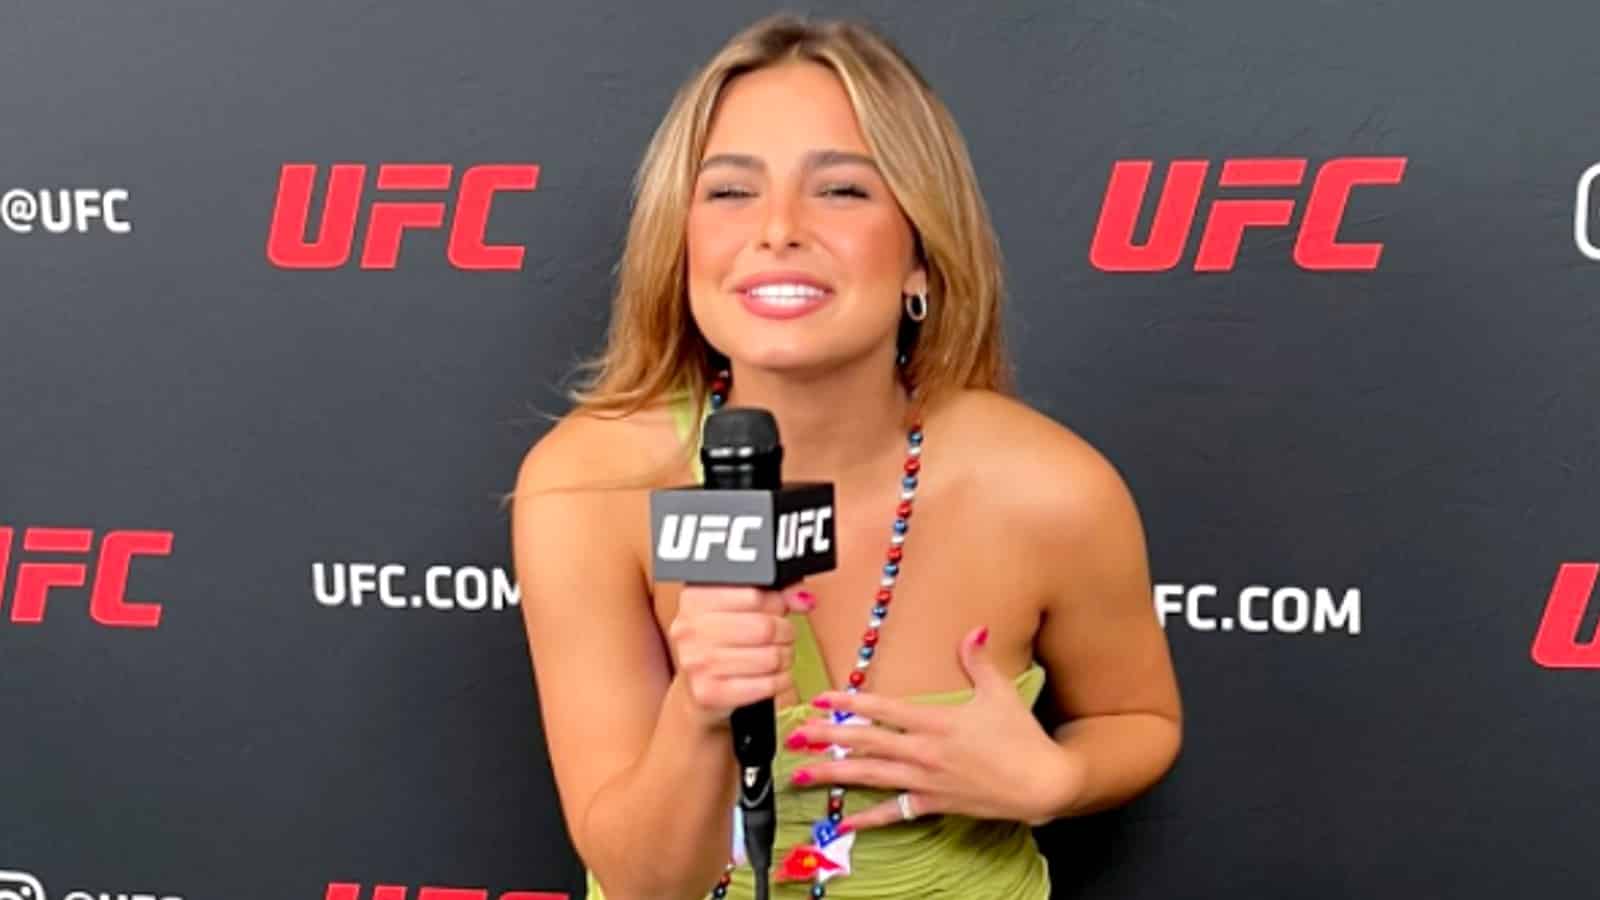 Addison Rae working as a UFC reporter